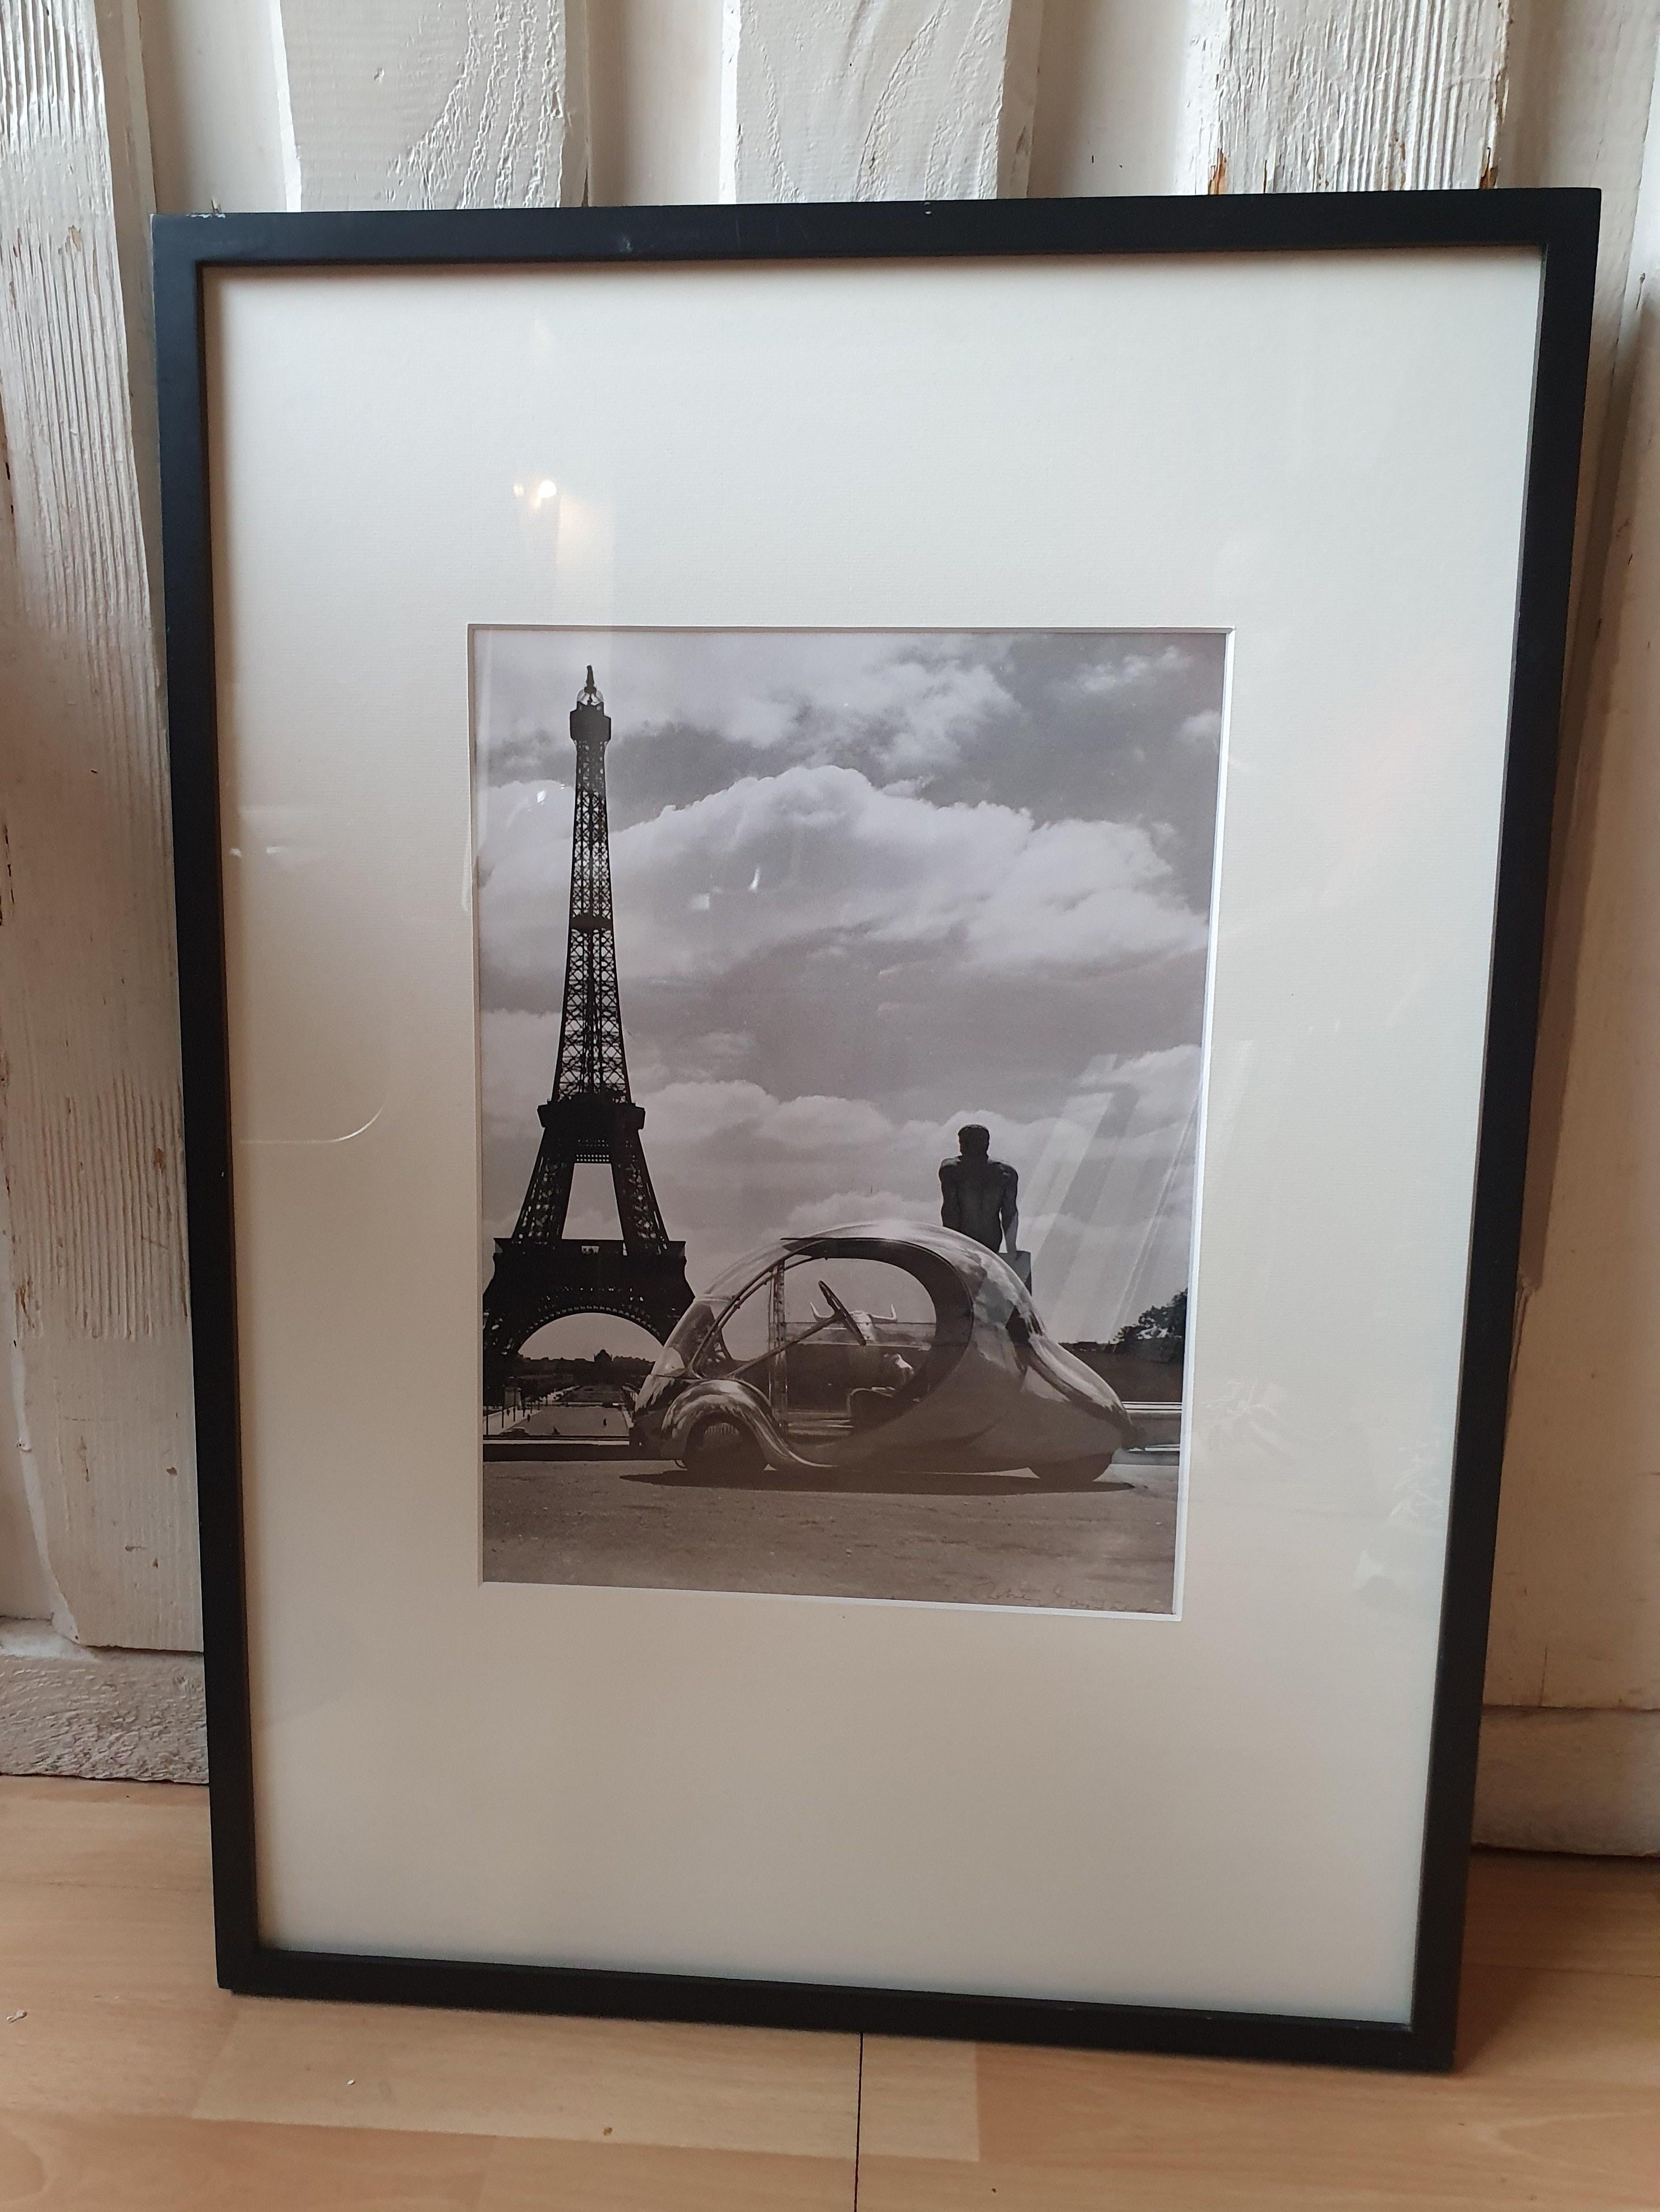 Robert Doisneau Paul Arzens' "Electric Egg" in front of the Eiffel Tower